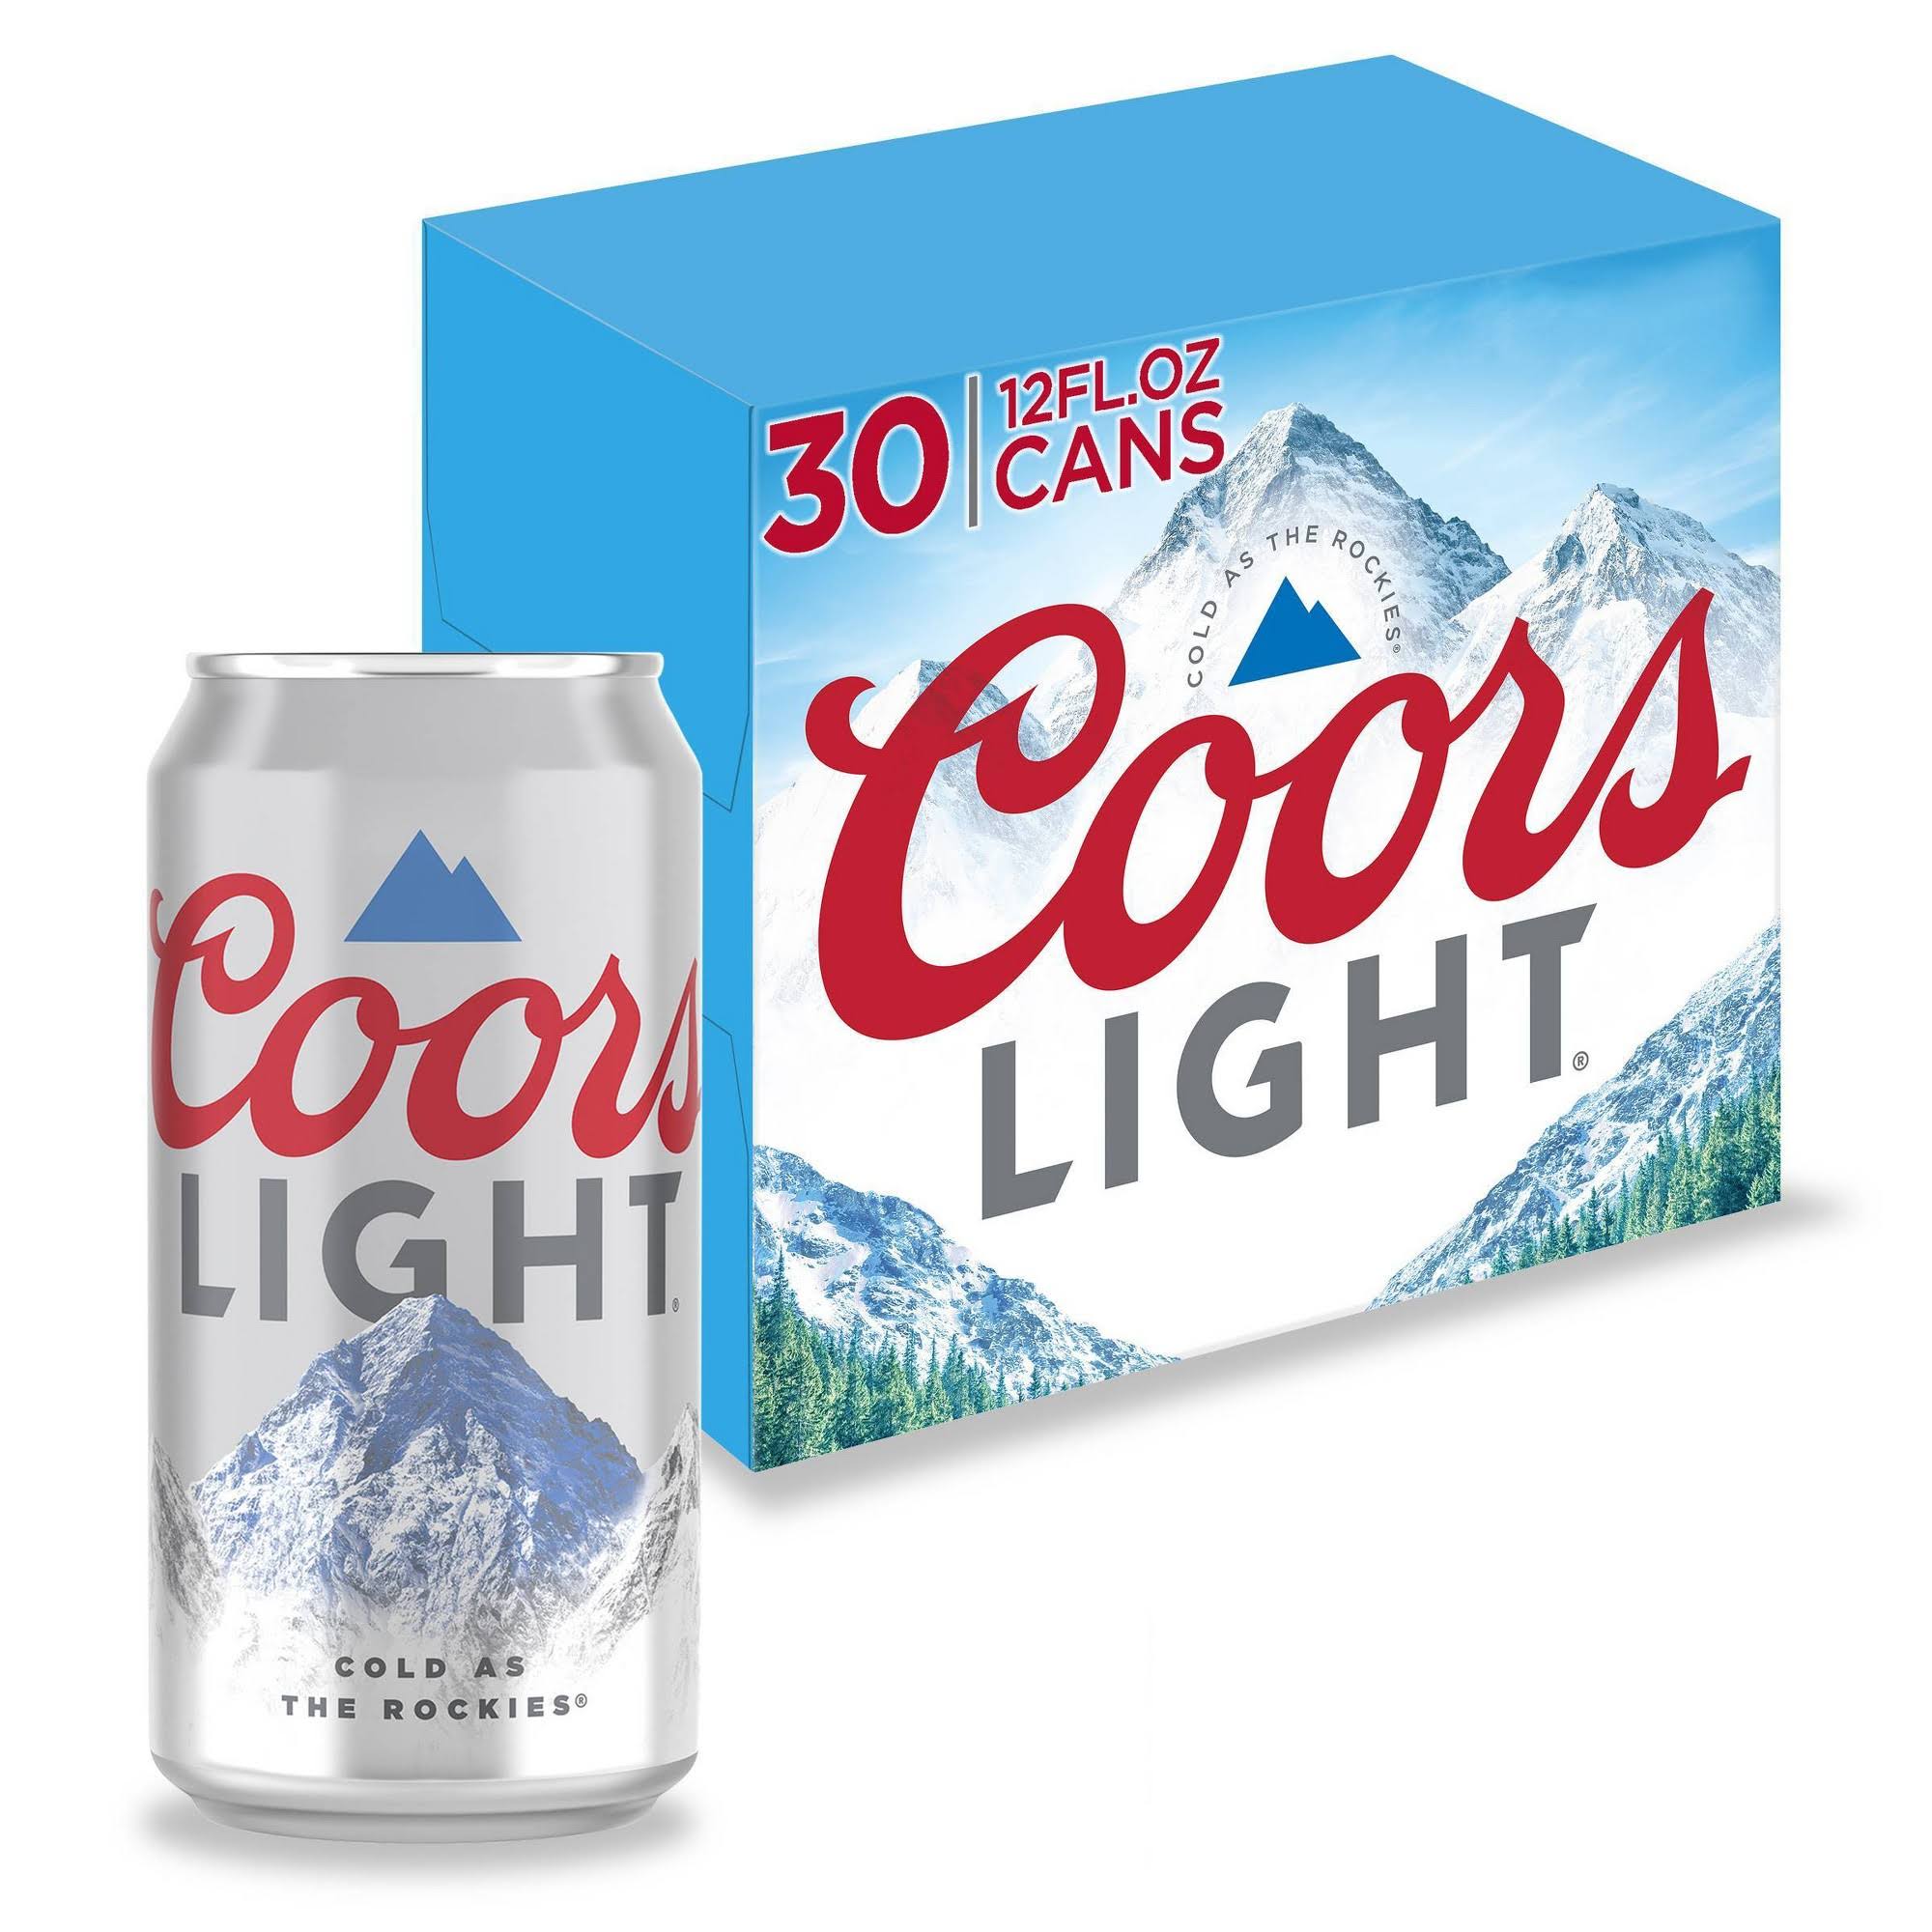 Coors Light Beer - 30 Cans